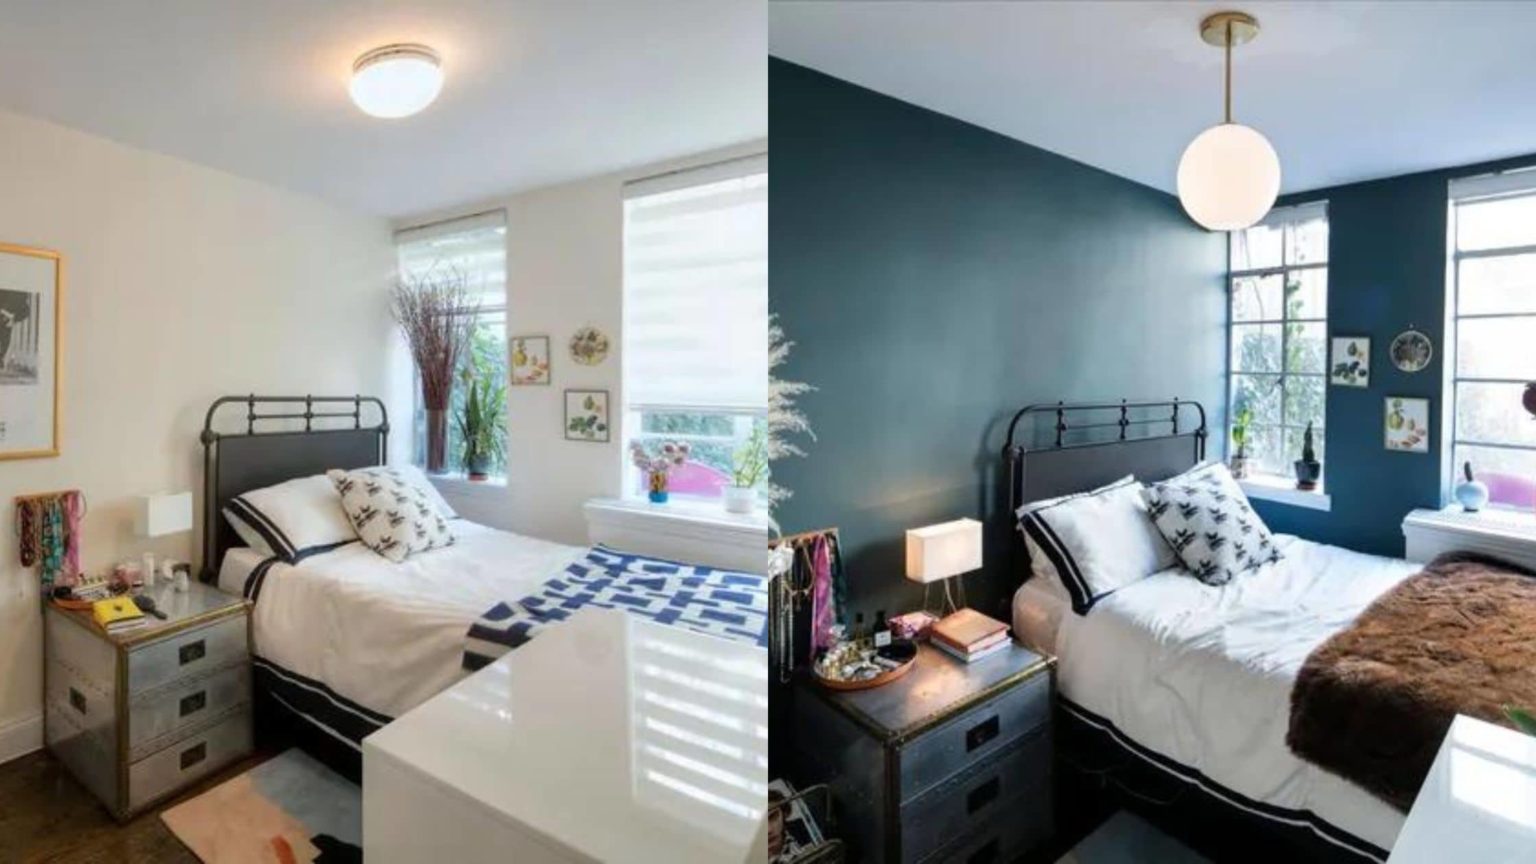 10 Decor Mistakes That Can Make Your Home Look 22Cheap22